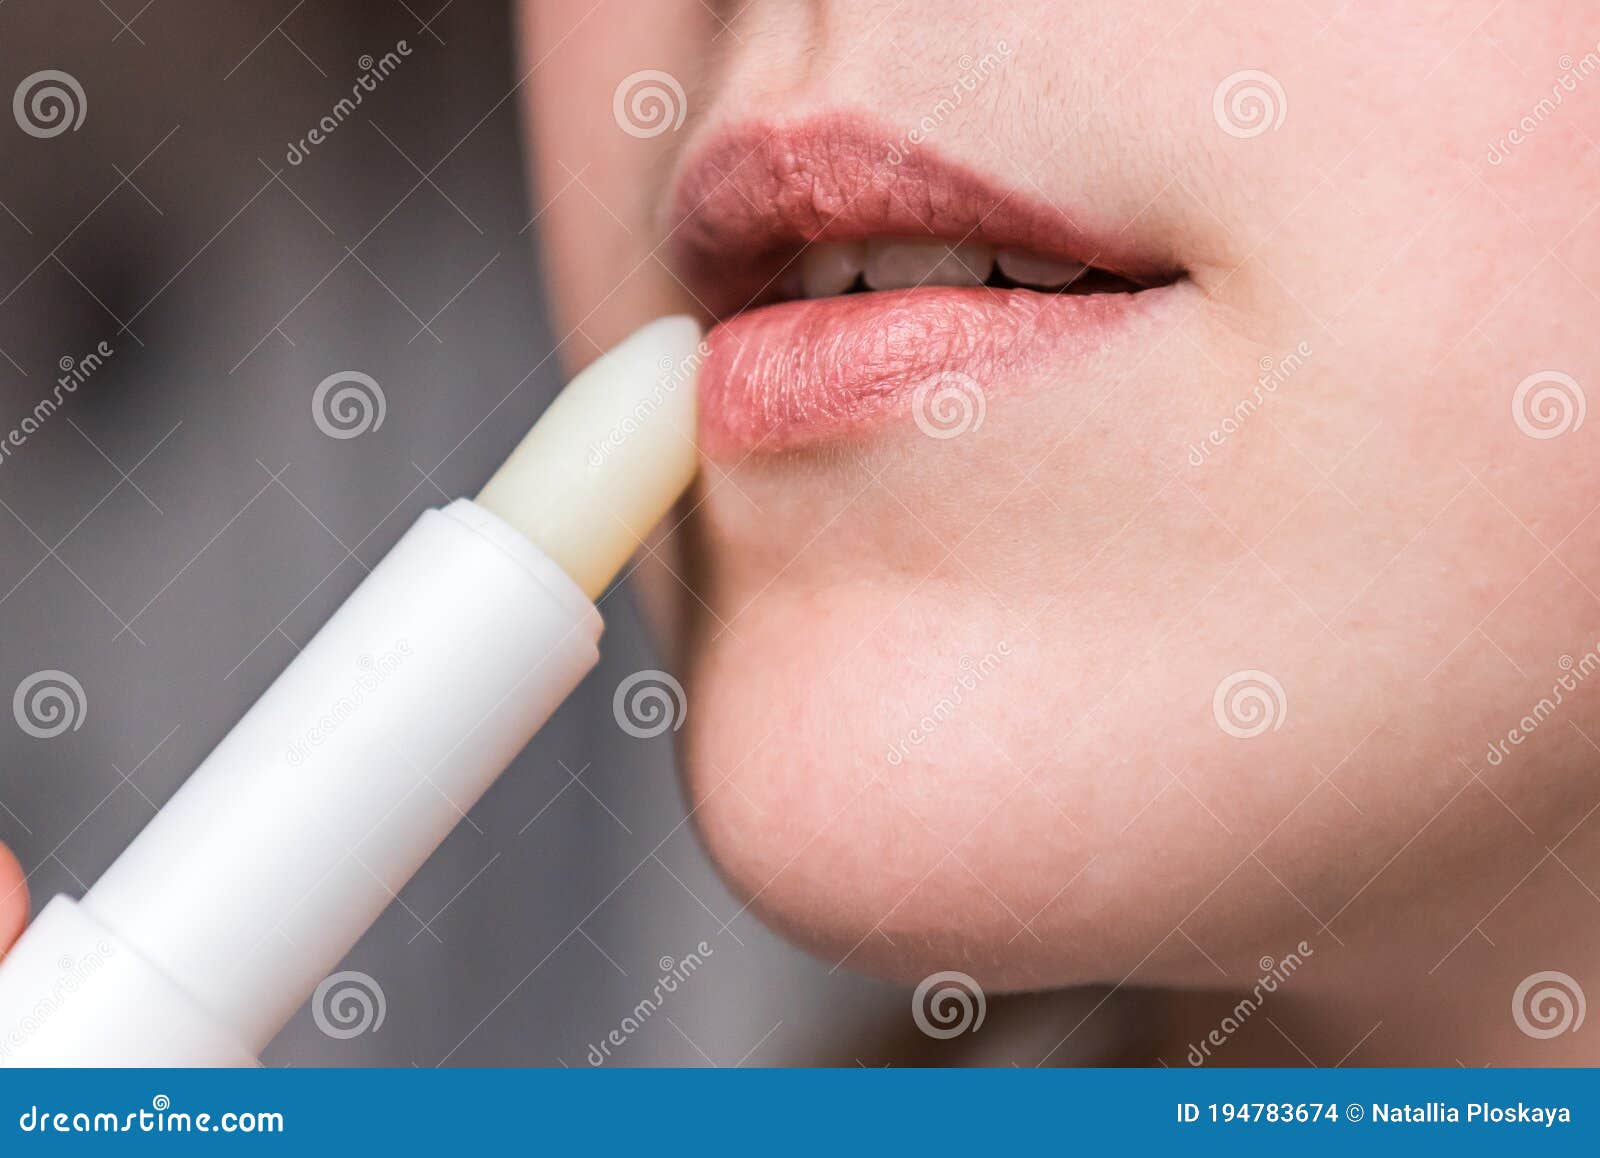 chapped, or cracked, dry lips that have lost moisture. woman maintains her lips. lip care